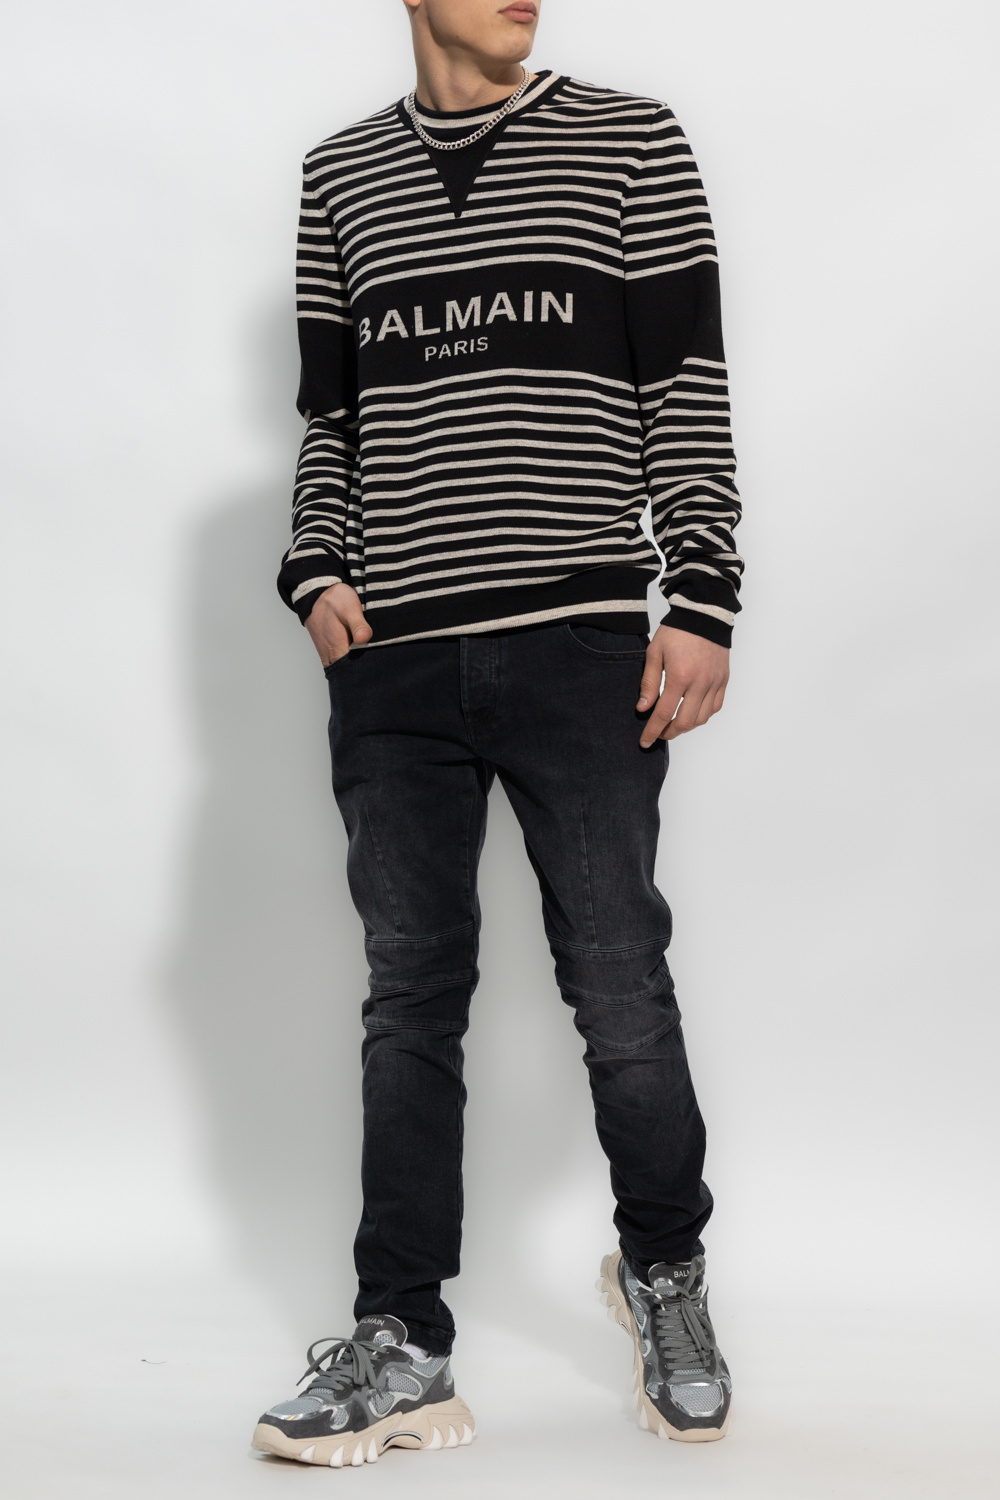 Balmain Knit Leggings With 6 Buttons